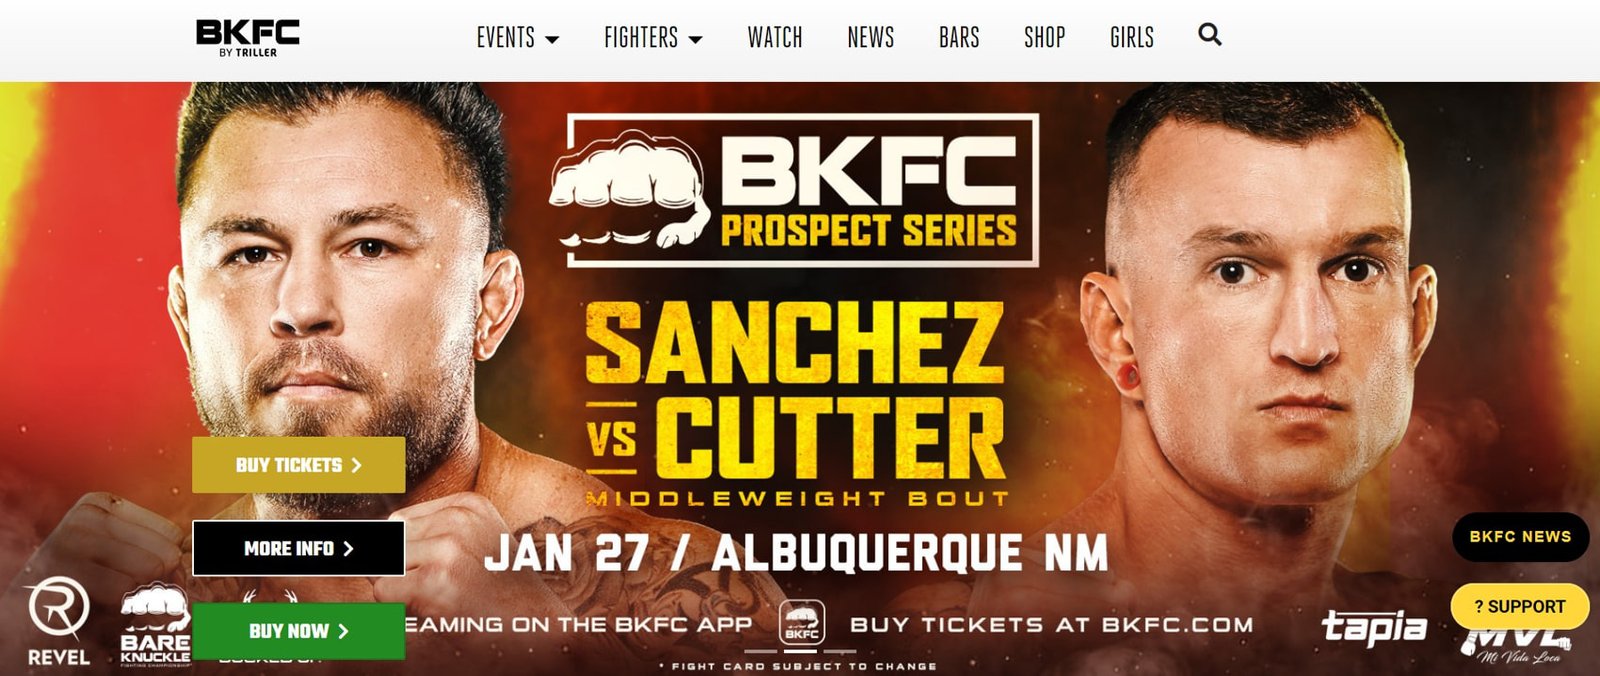 Bare Knuckle Fighting Championship (BKFC)